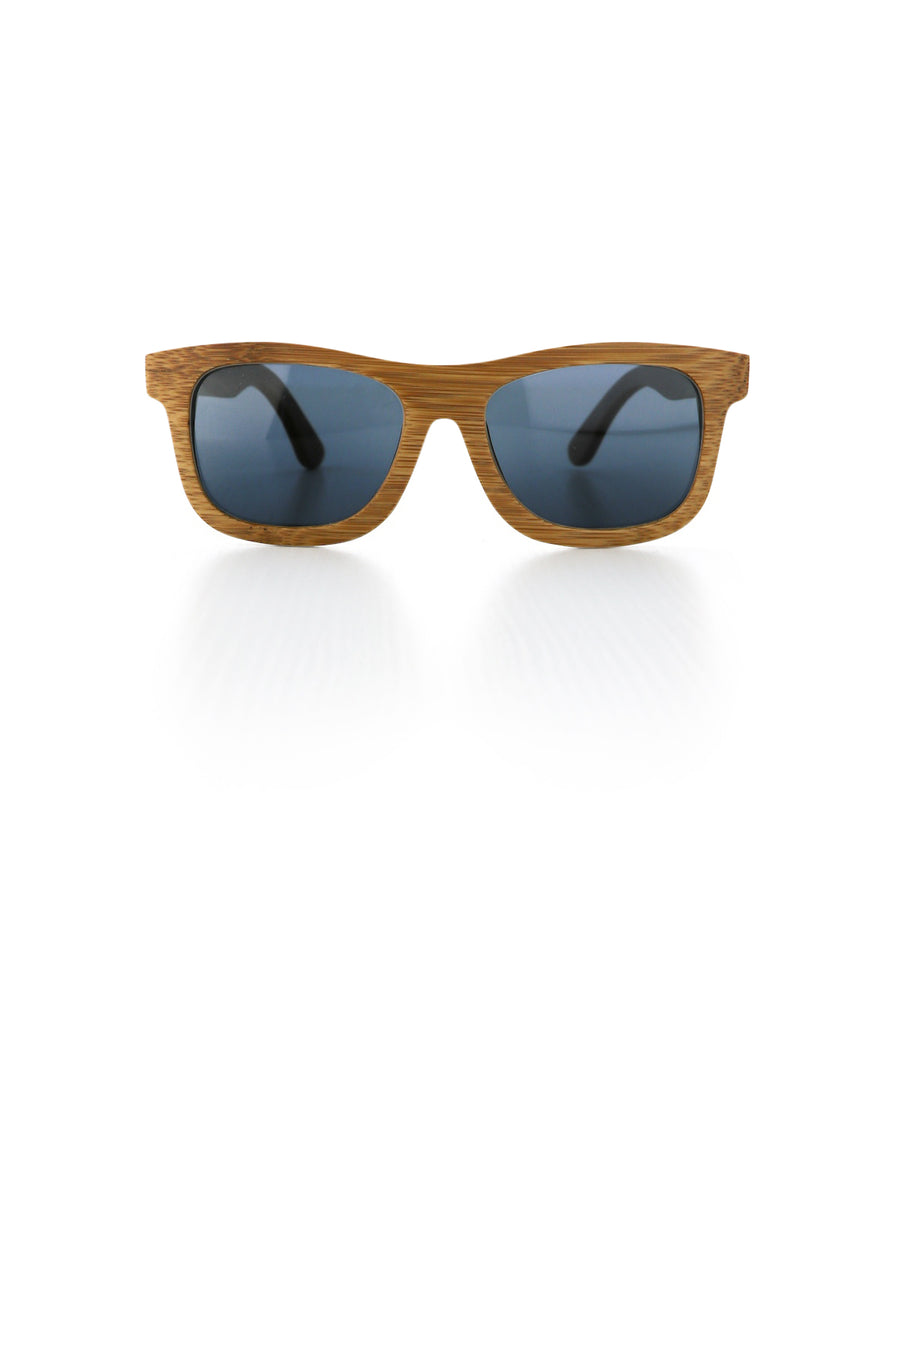 Bamboo Sunglasses - Roger Ted and Lemon